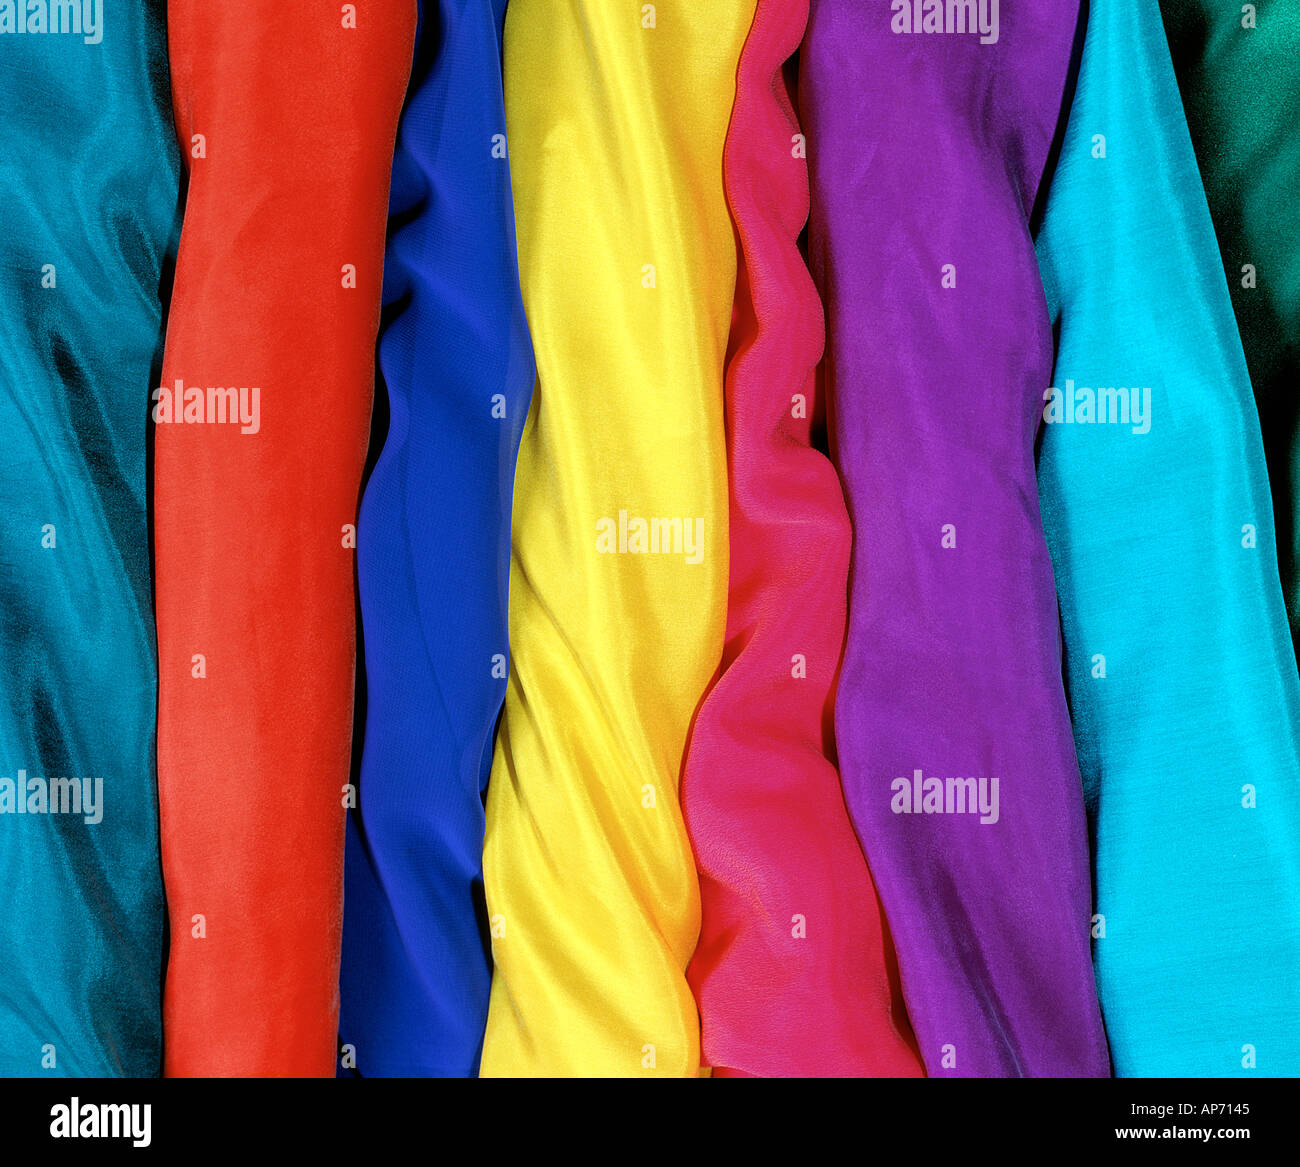 Bolts of Colorful Silk Fabric Stock Photo